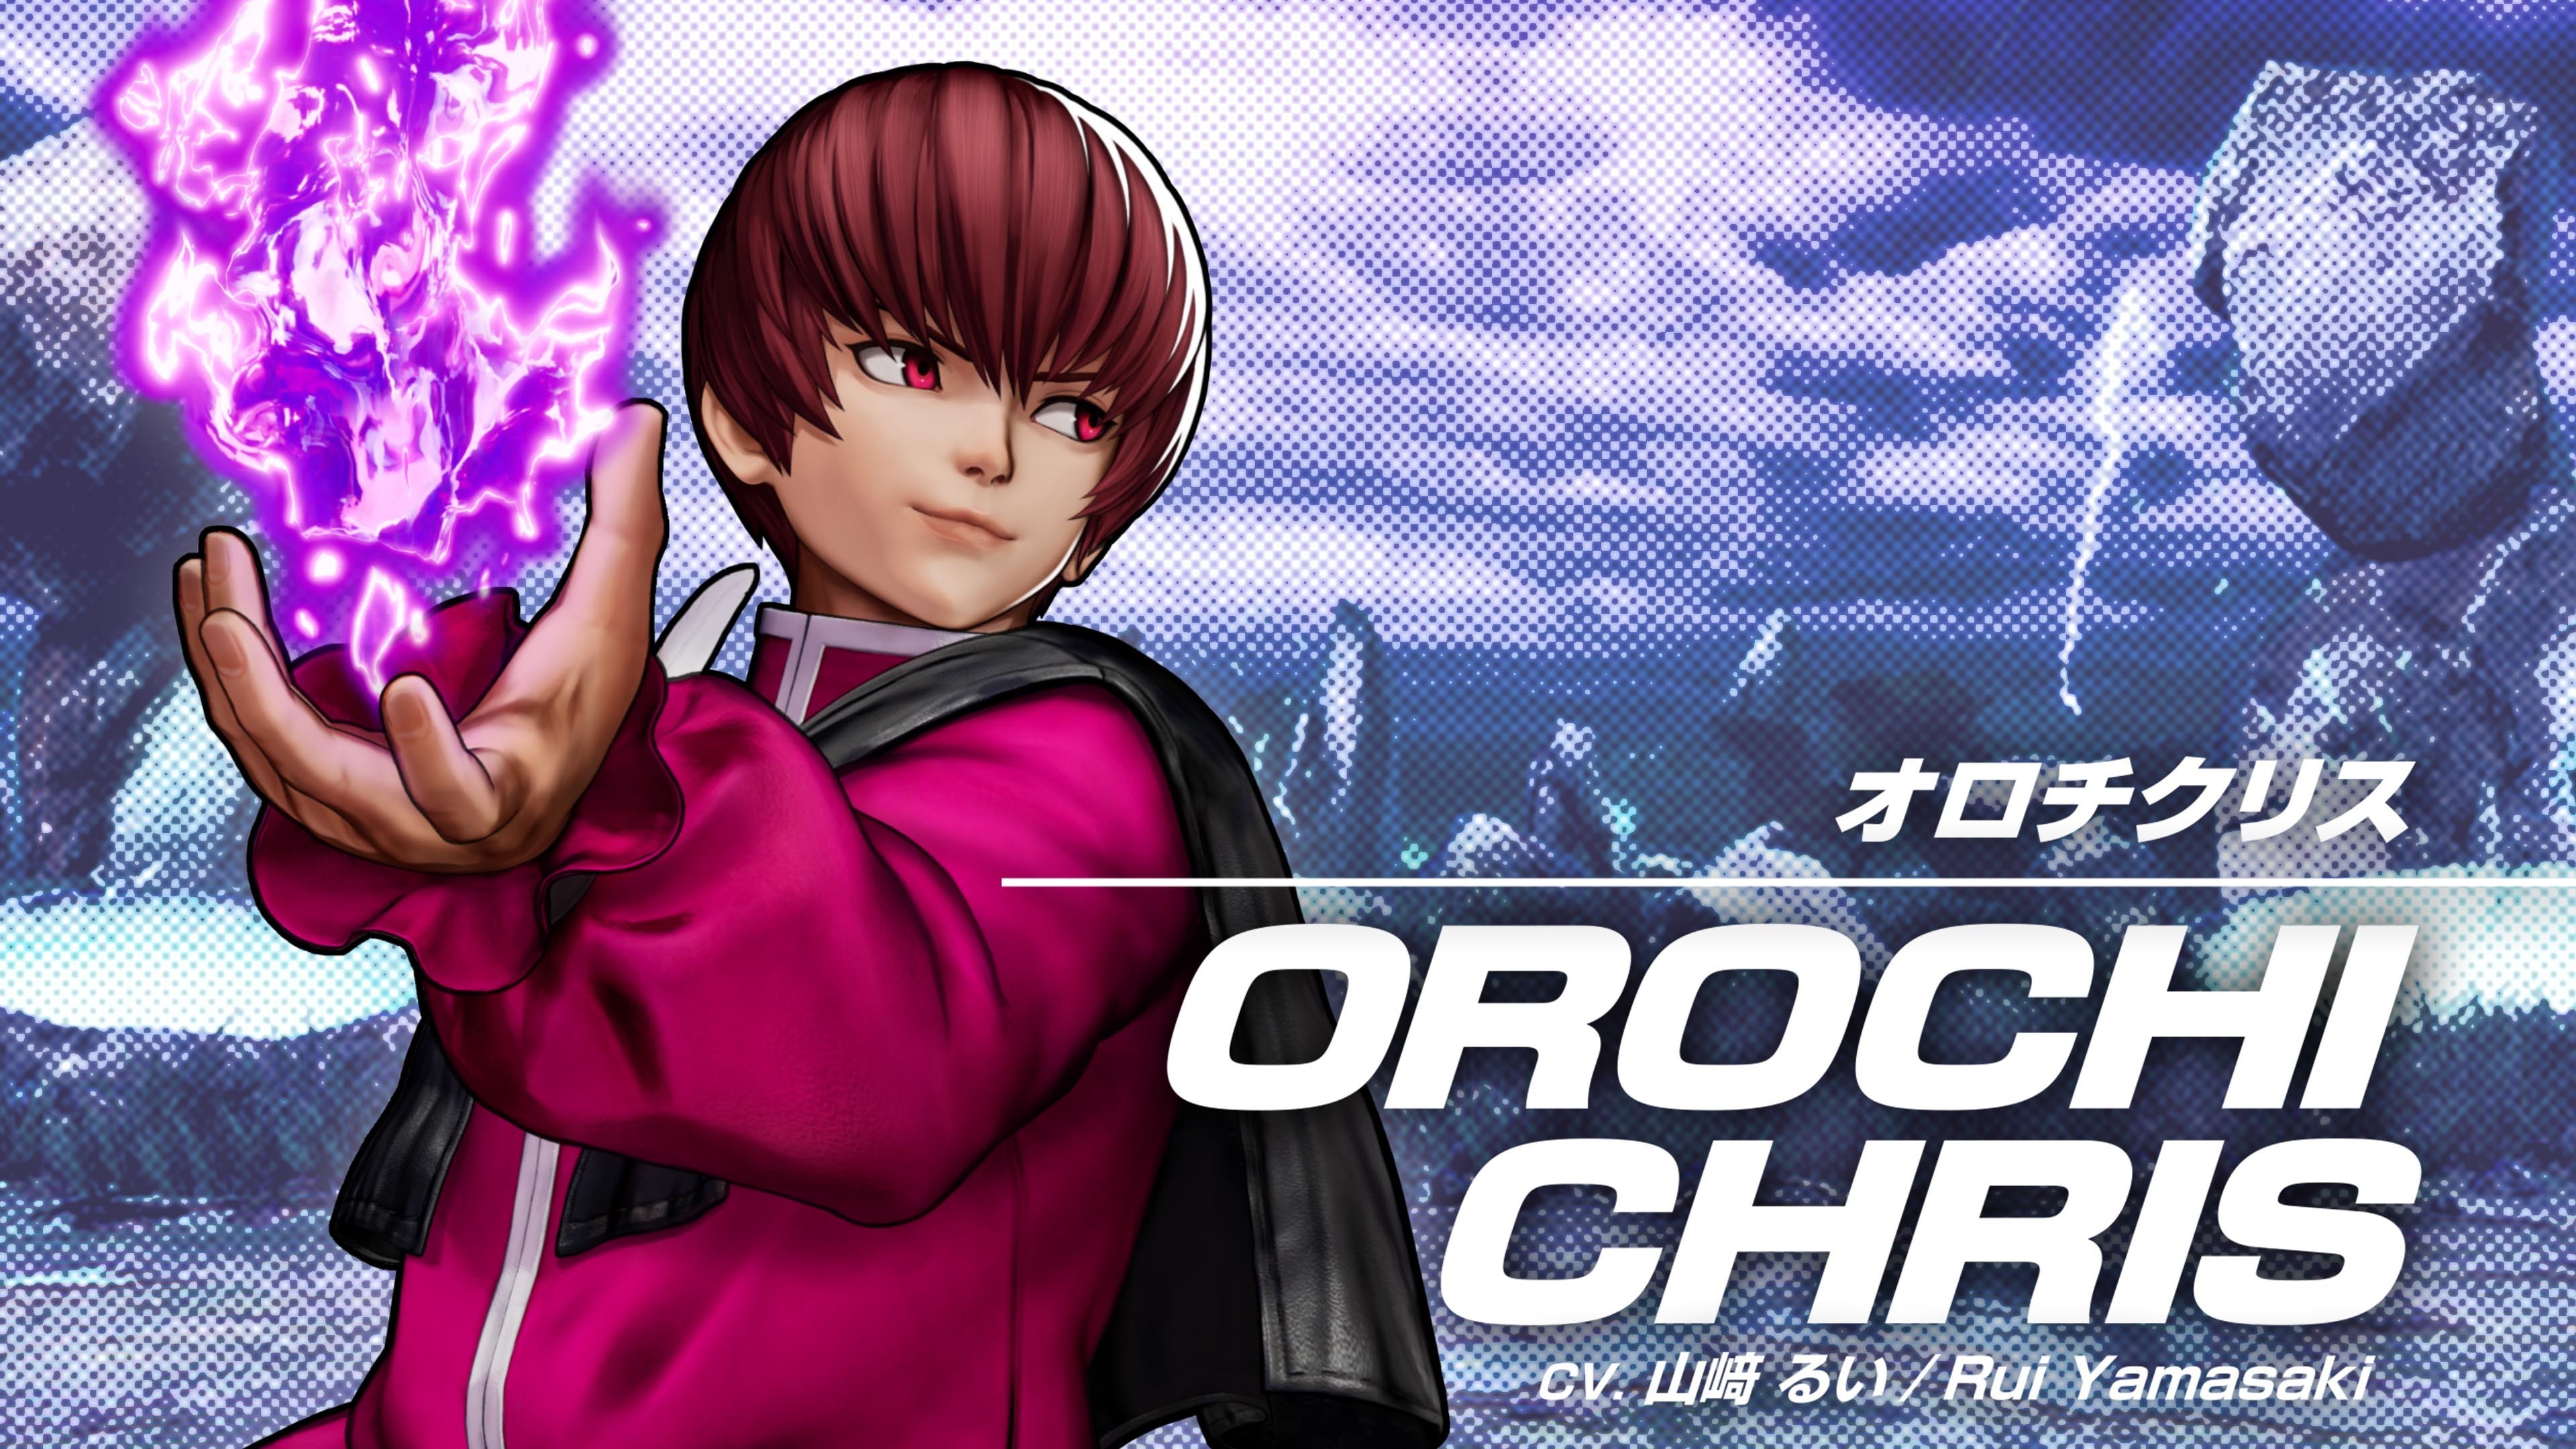 Orochi, mist XG | King of fighters, Fighter, Anime cặp